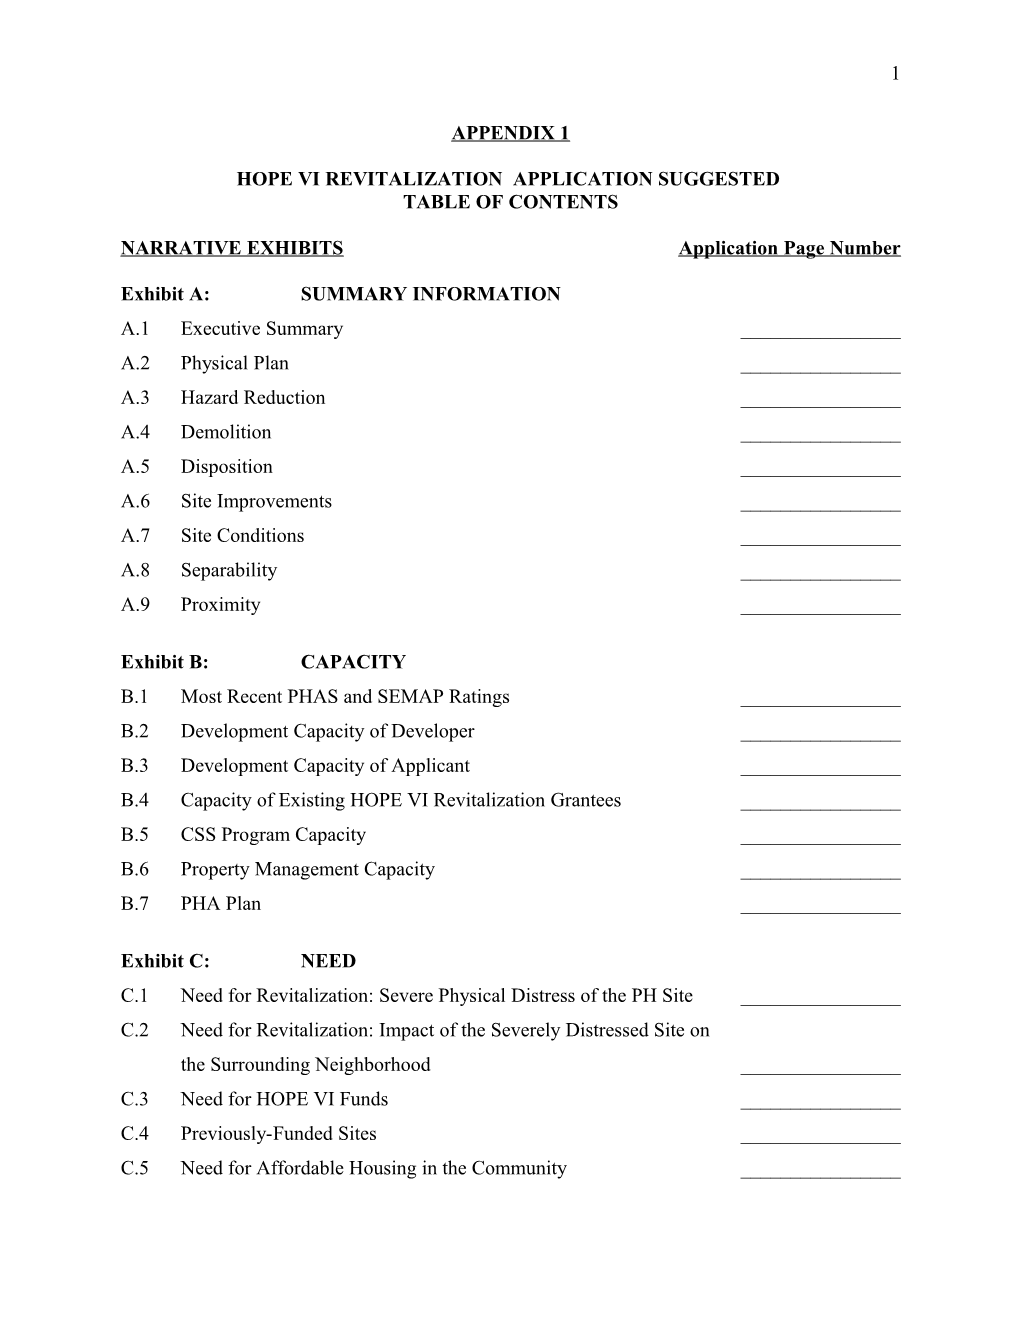 Hope Vi Revitalization Application Suggested Table of Contents